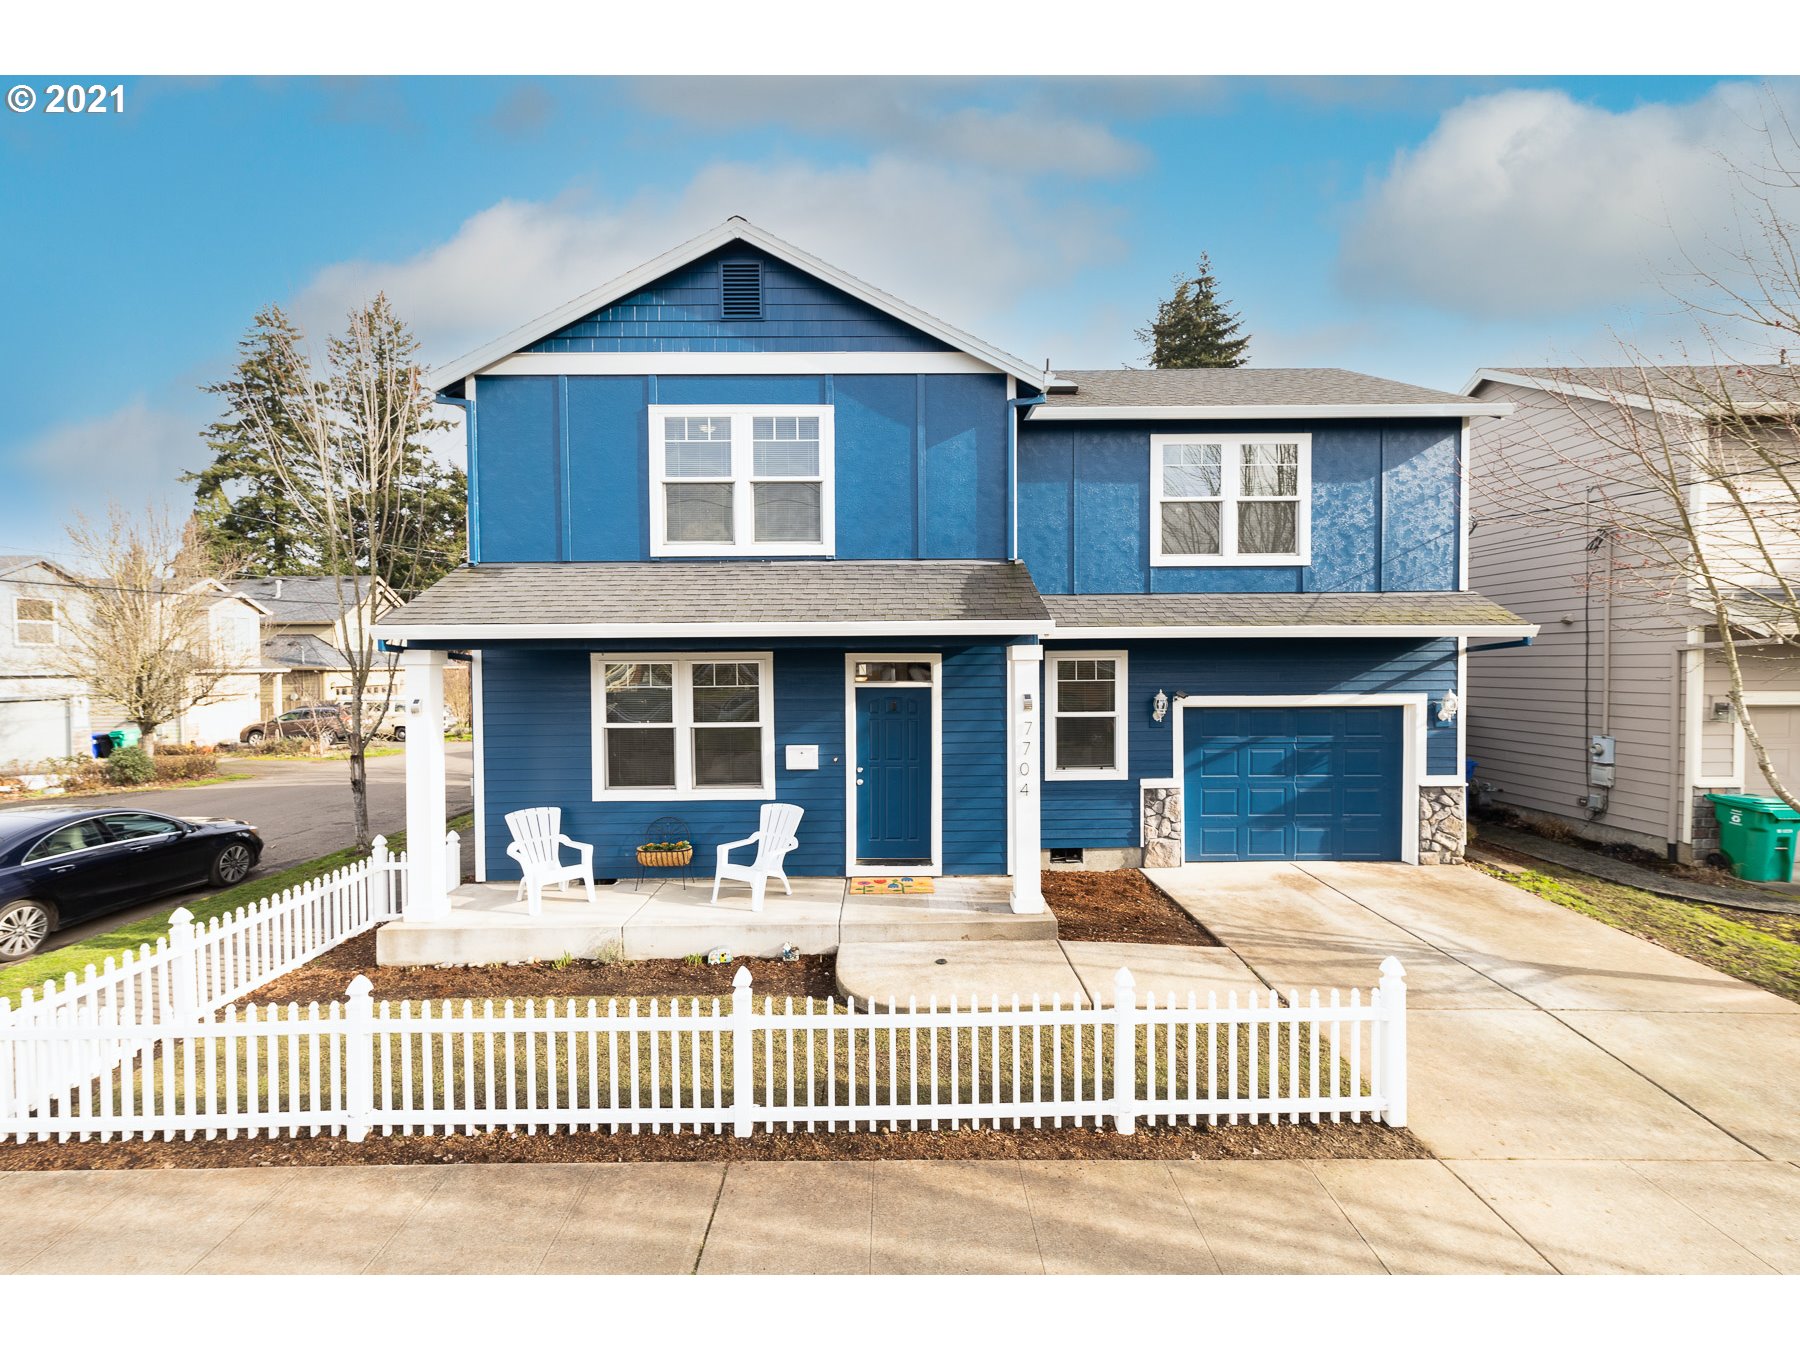 7704 SE 60TH AVE (1 of 20)